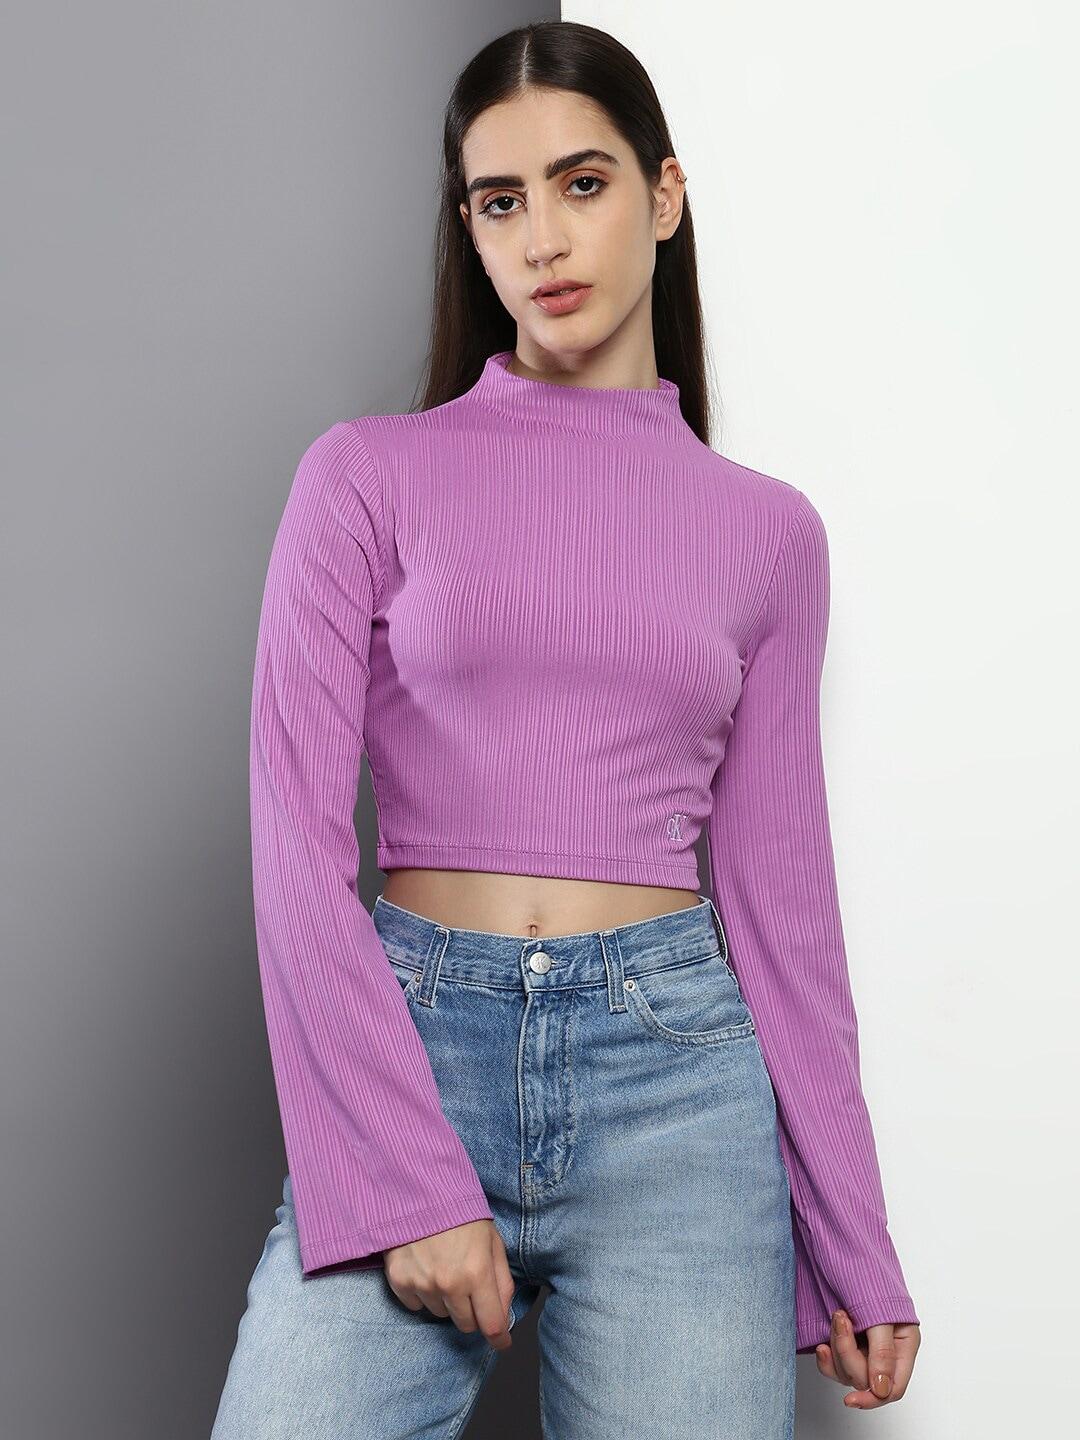 calvin-klein-jeans-high-neck-flared-sleeves-striped-crop-top